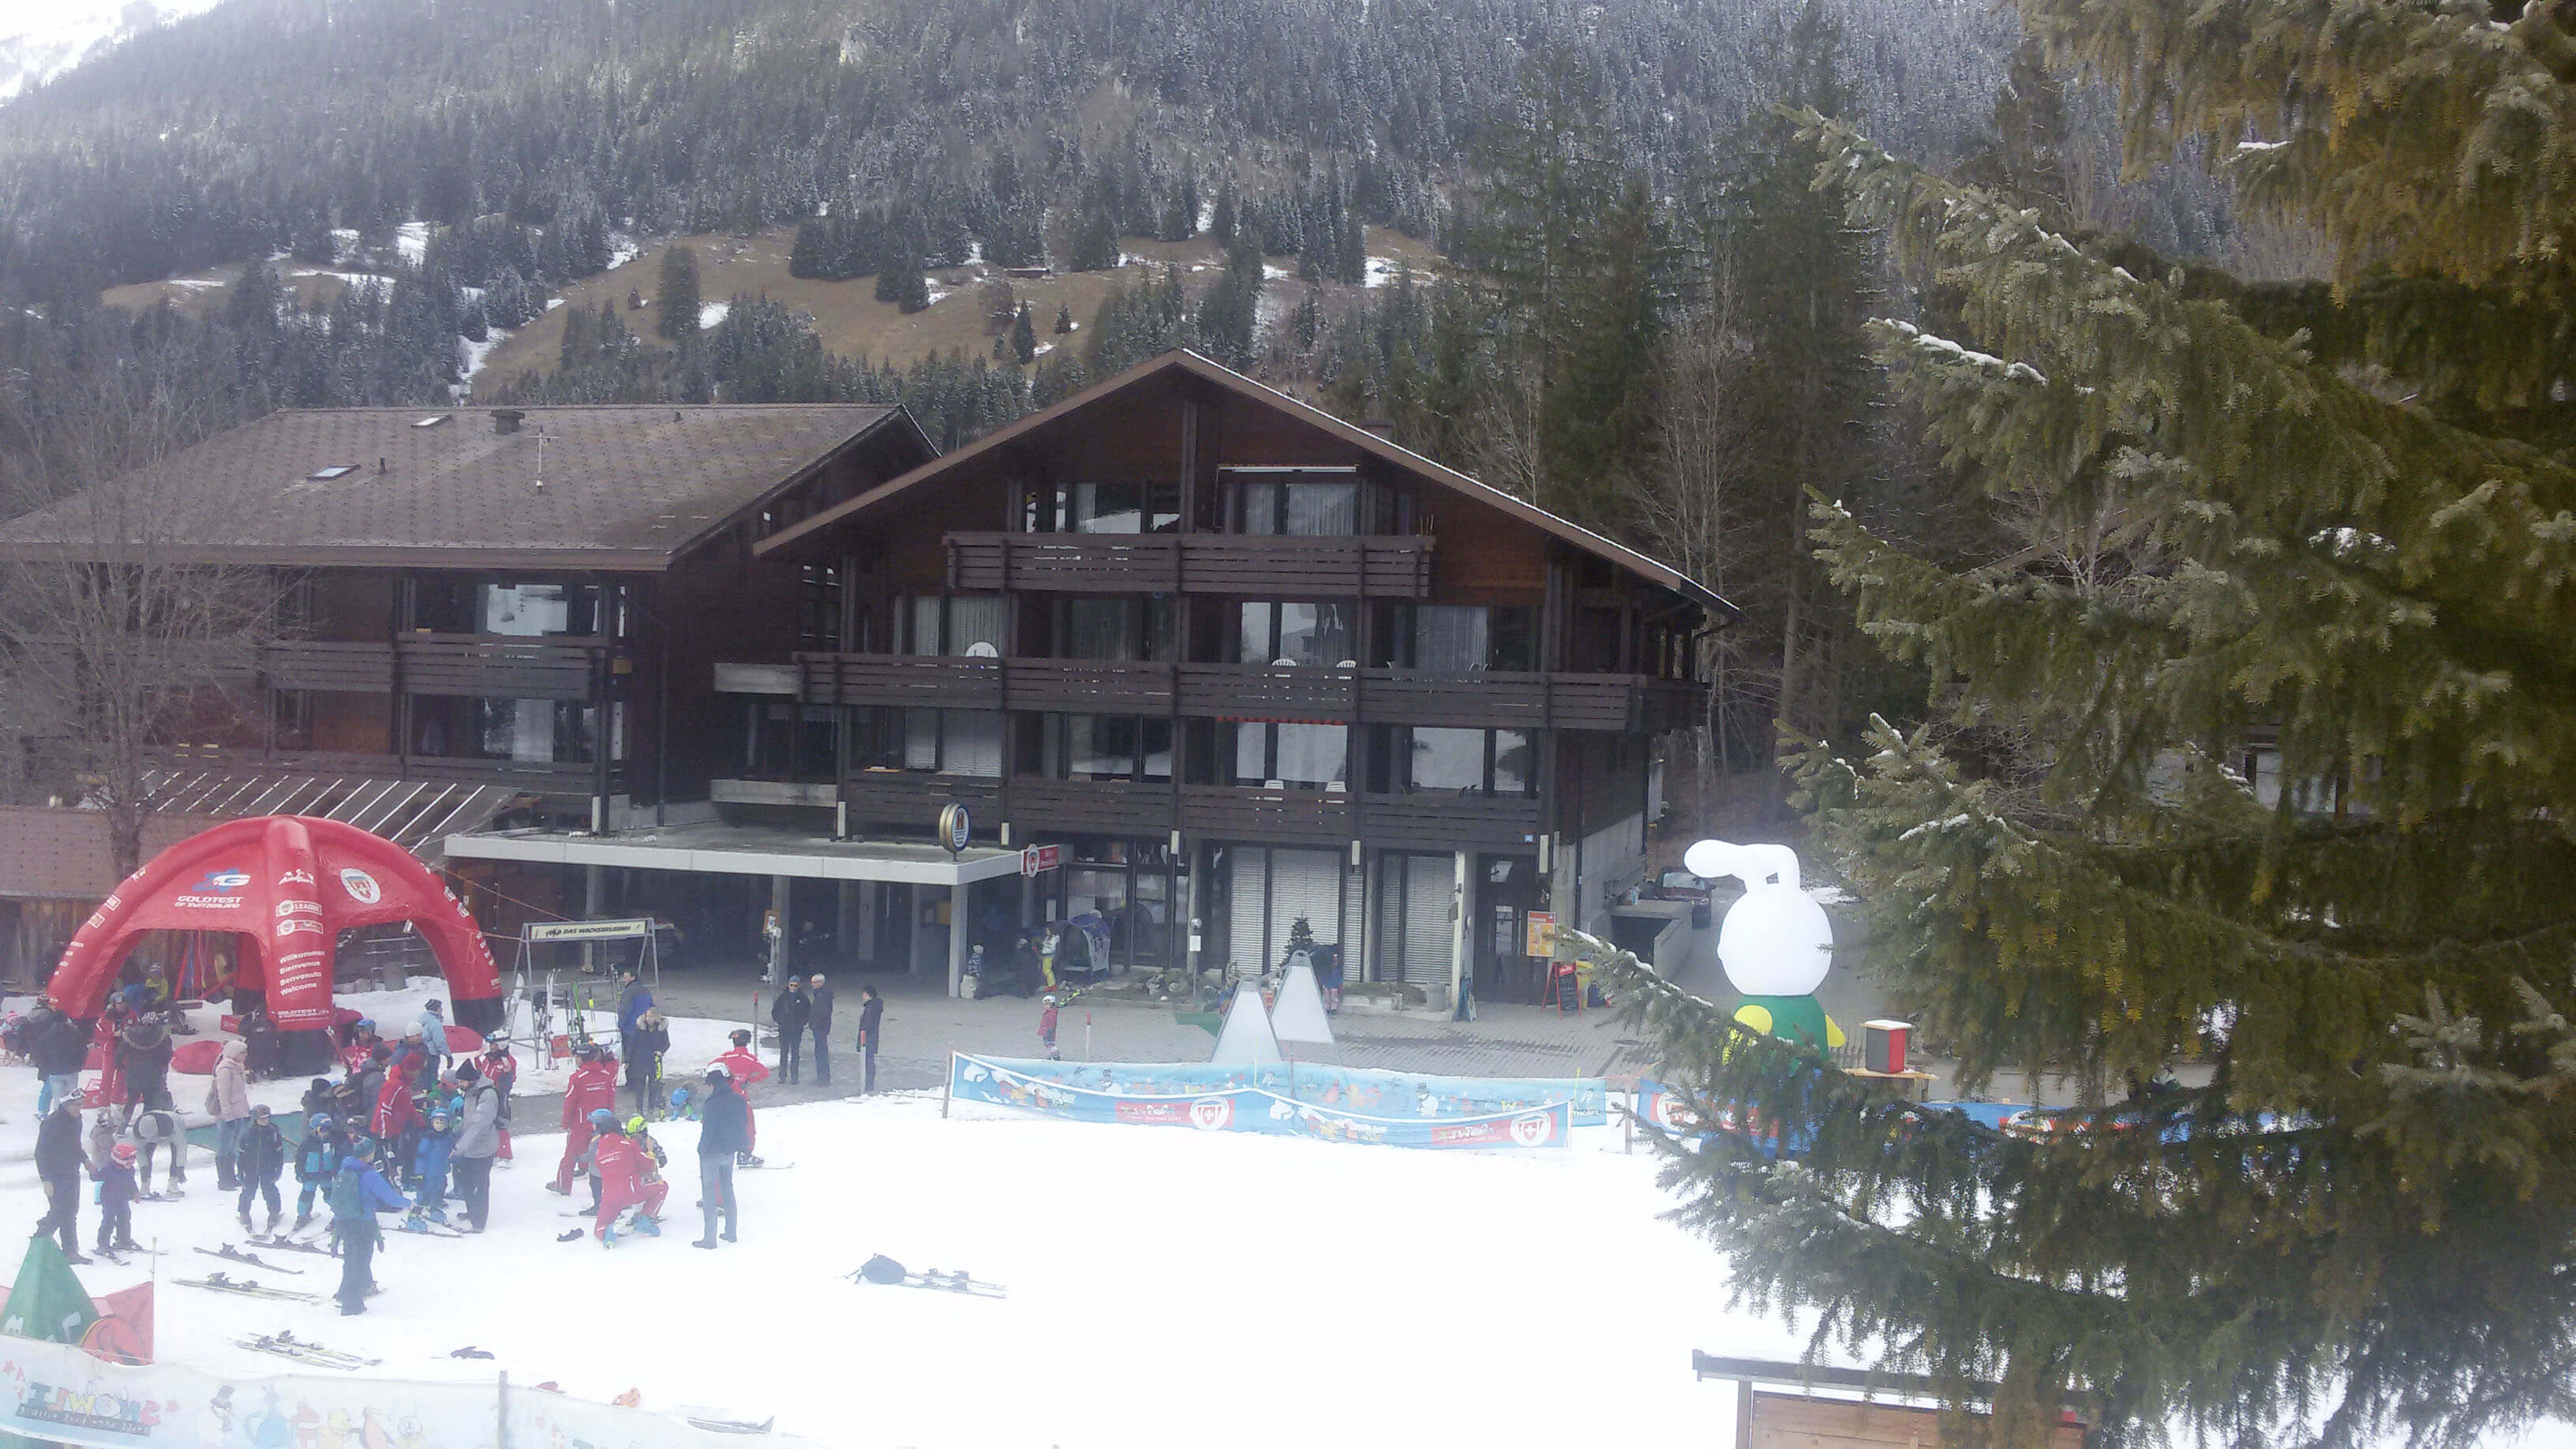 Holiday centre with restaurant and ski school in winter